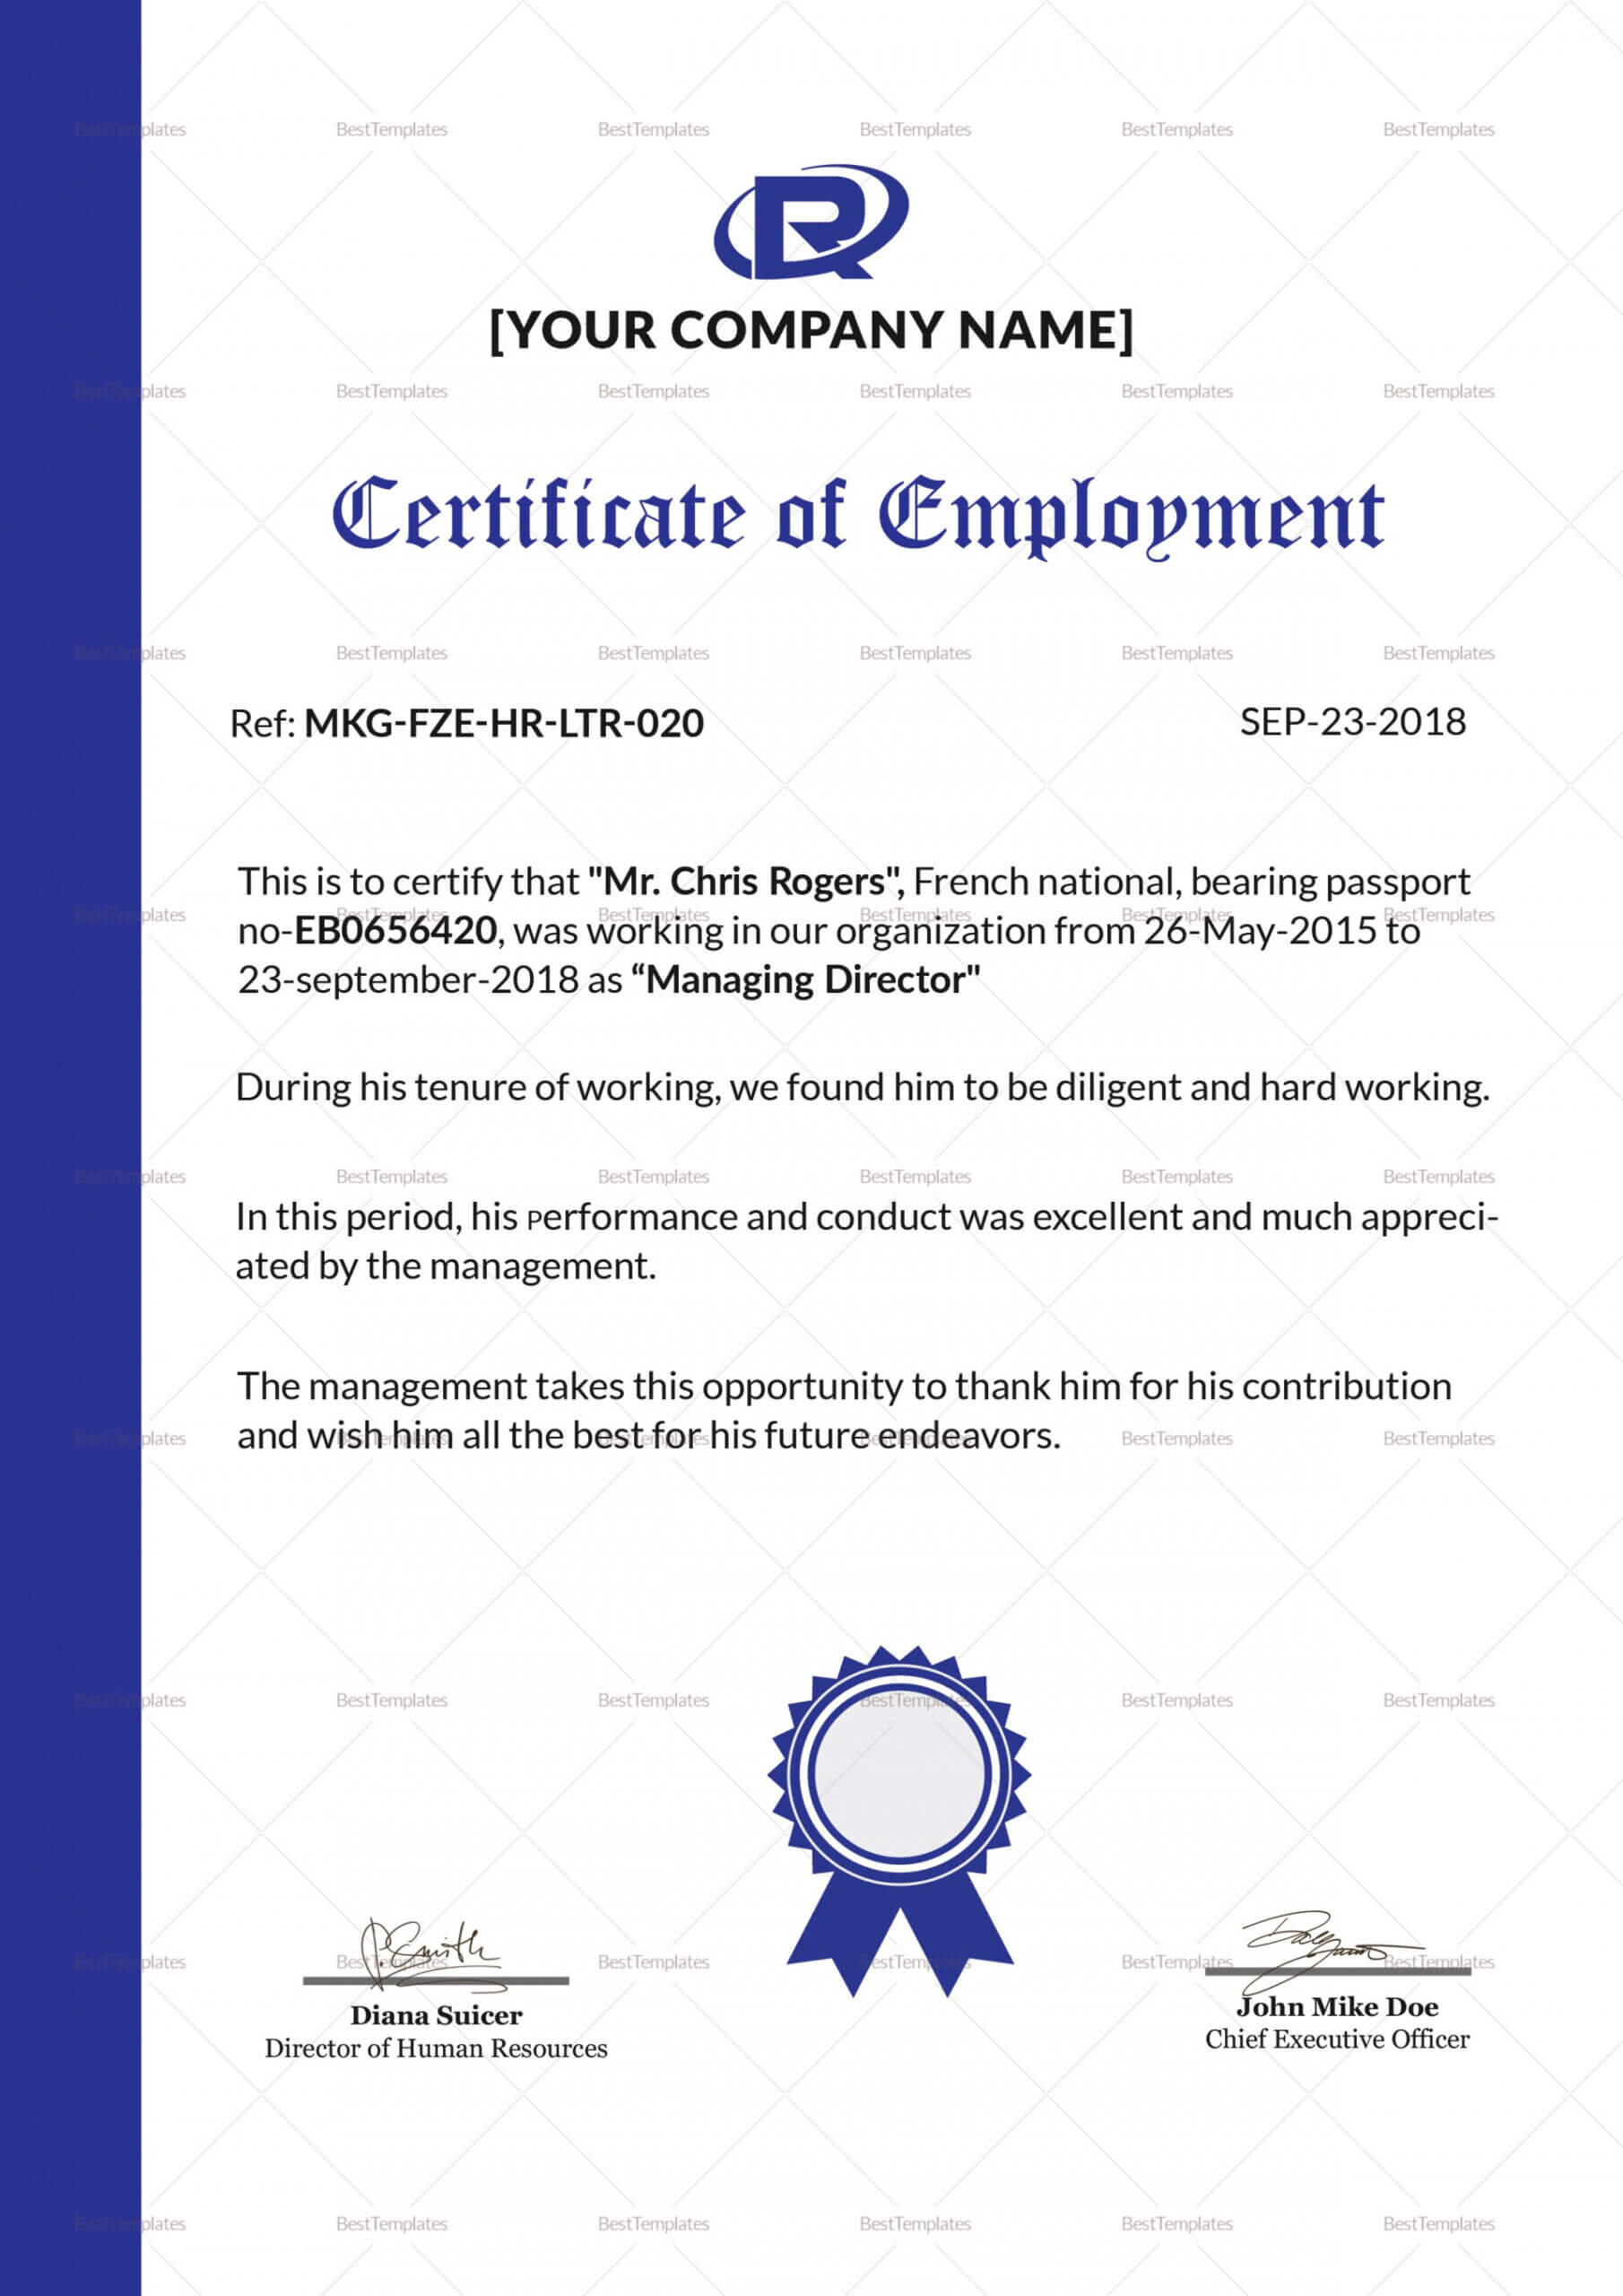 035 Template Ideas Salary Certificate Request Letter Sample For Good Job Certificate Template